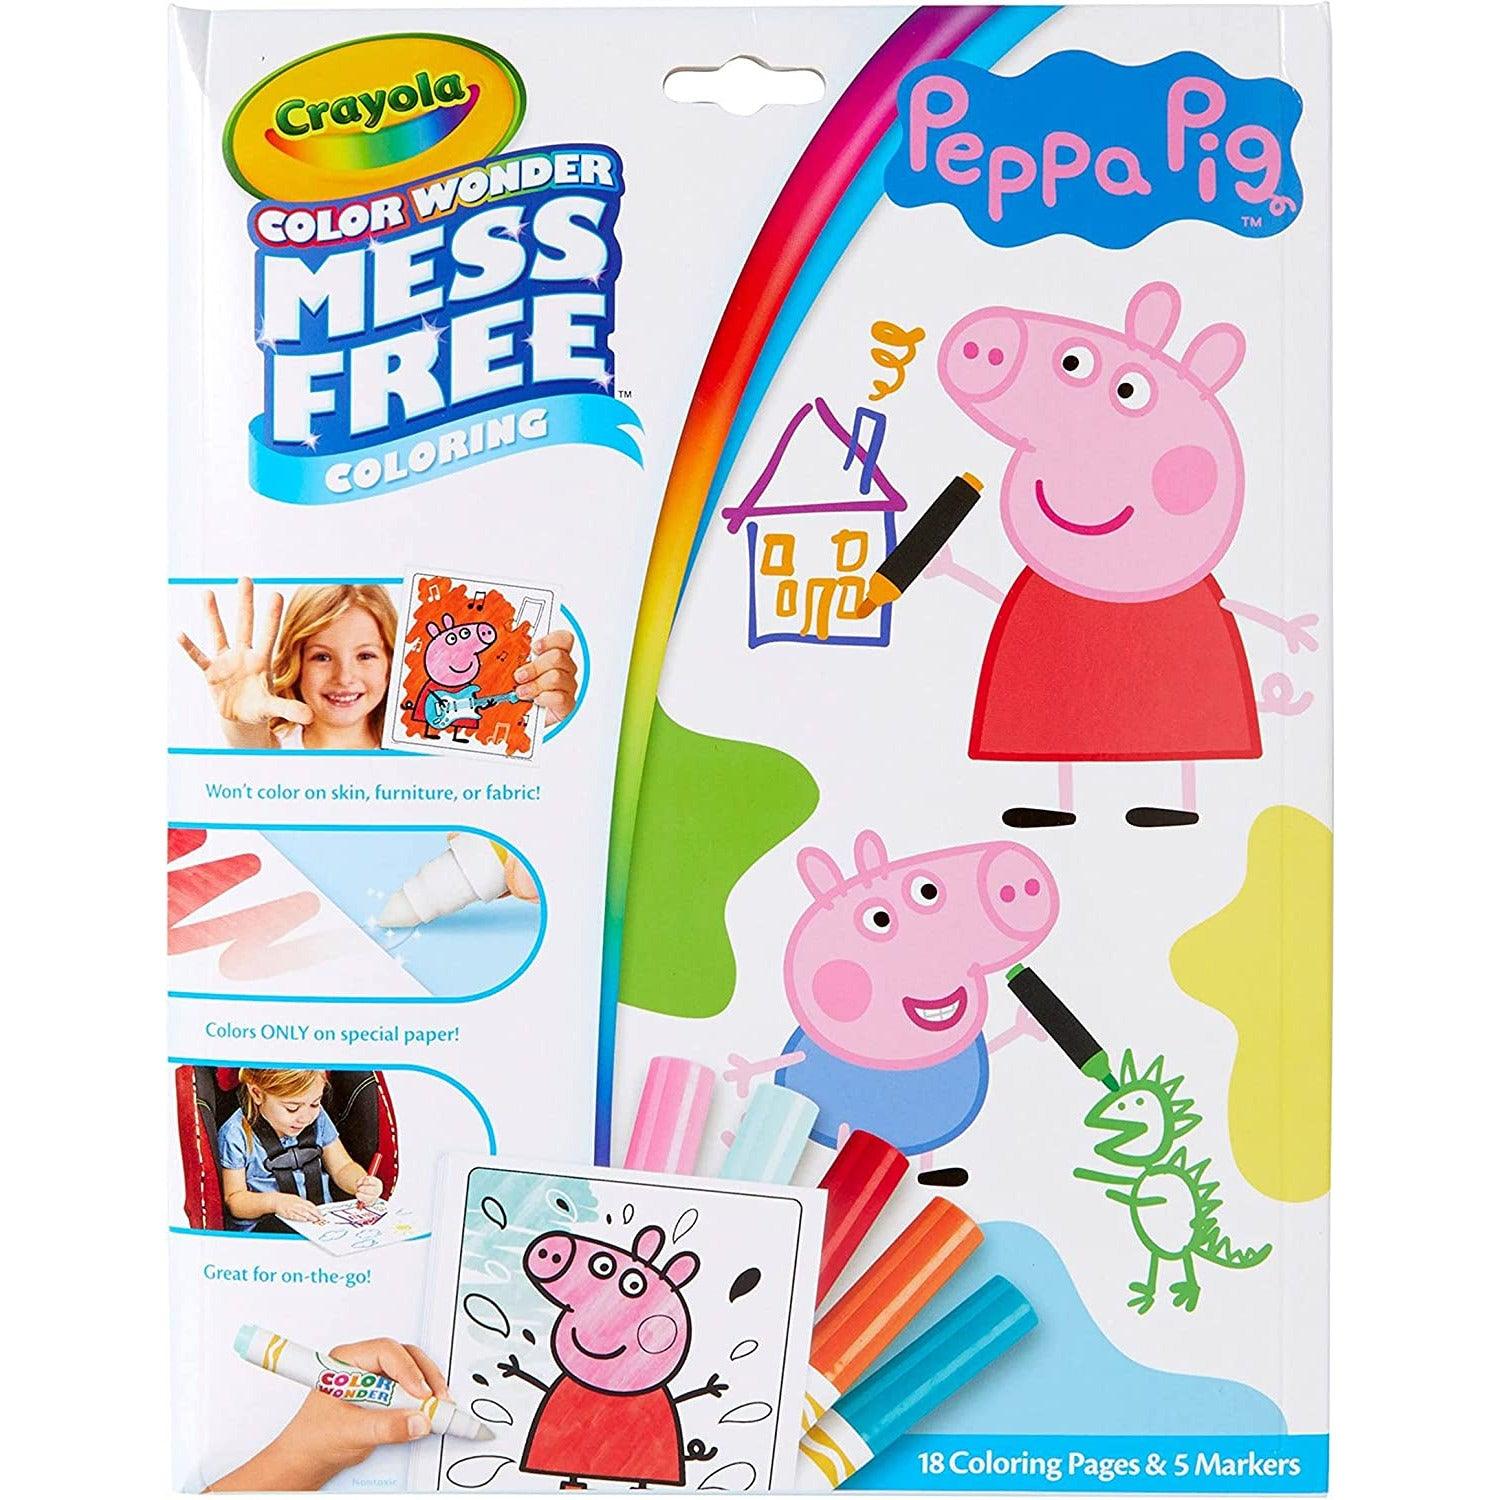 Crayola Peppa Pig Coloring Pages & Markers, Color Wonder Mess Free Coloring, Easter Basket Stuffers - BumbleToys - 5-7 Years, Boys, Drawing & Painting, Girls, Nursery Toys, OXE, Peppa Pig, Pre-Order